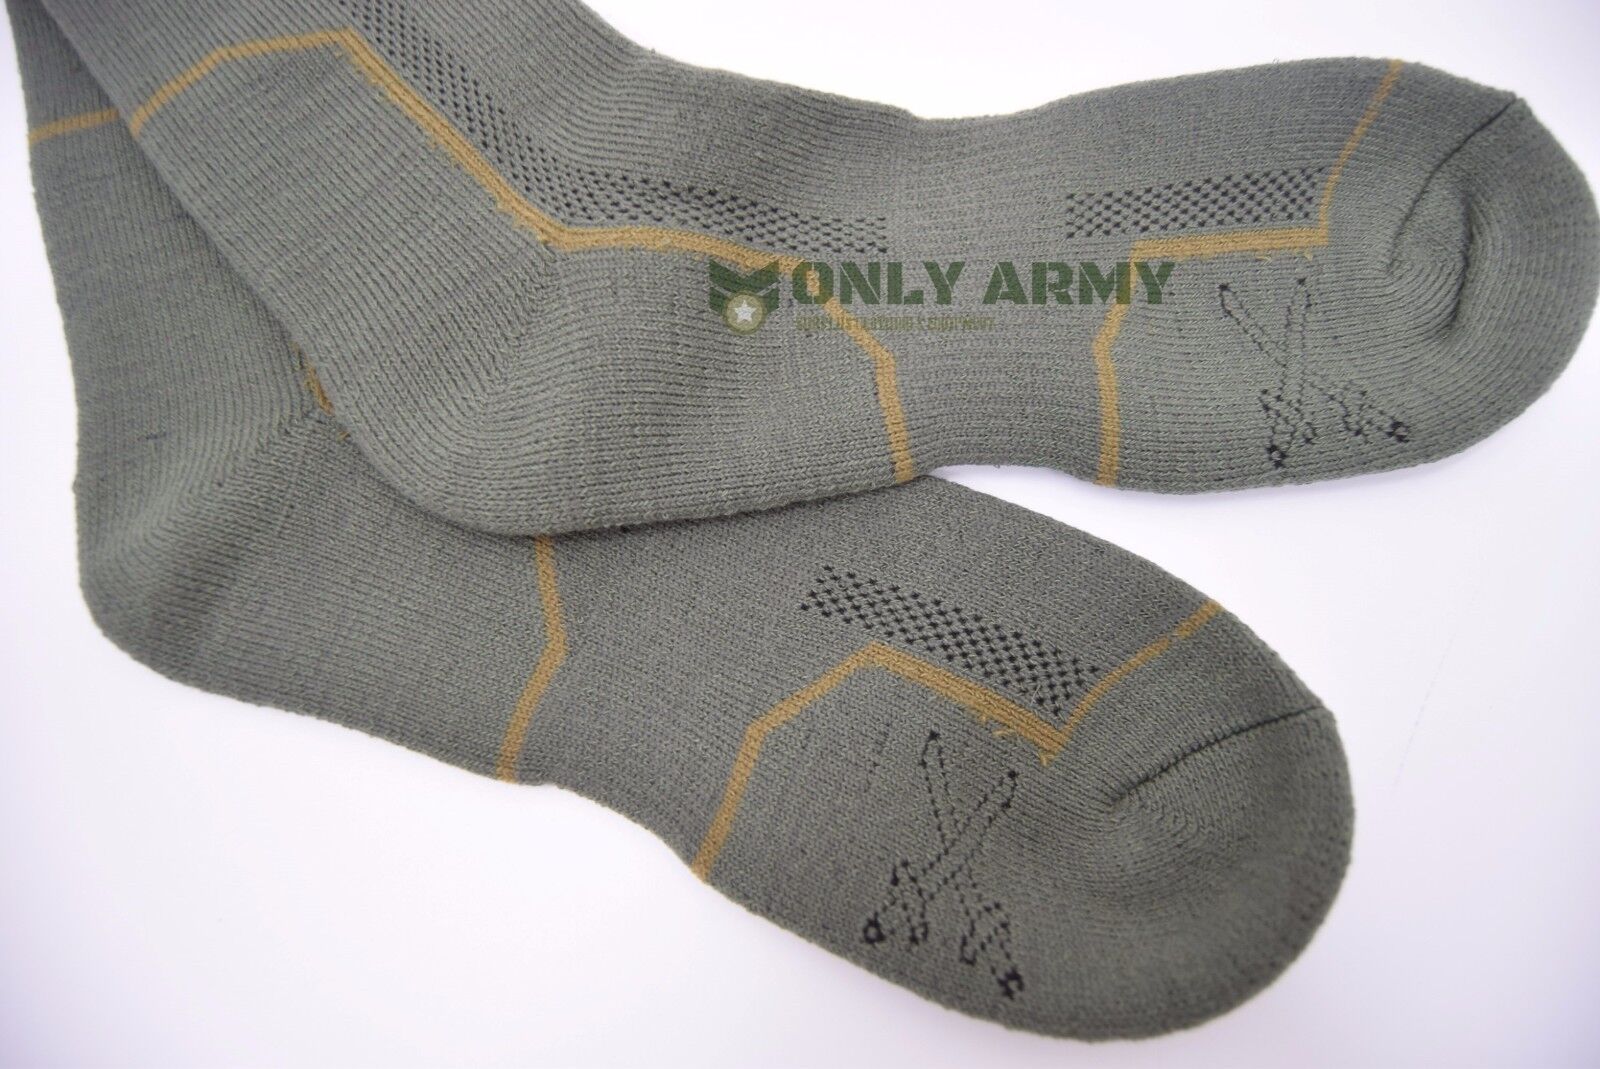 2 x Pairs Czech Army Cushioned Socks Thermal Long Warm Thick Military Boots Sock